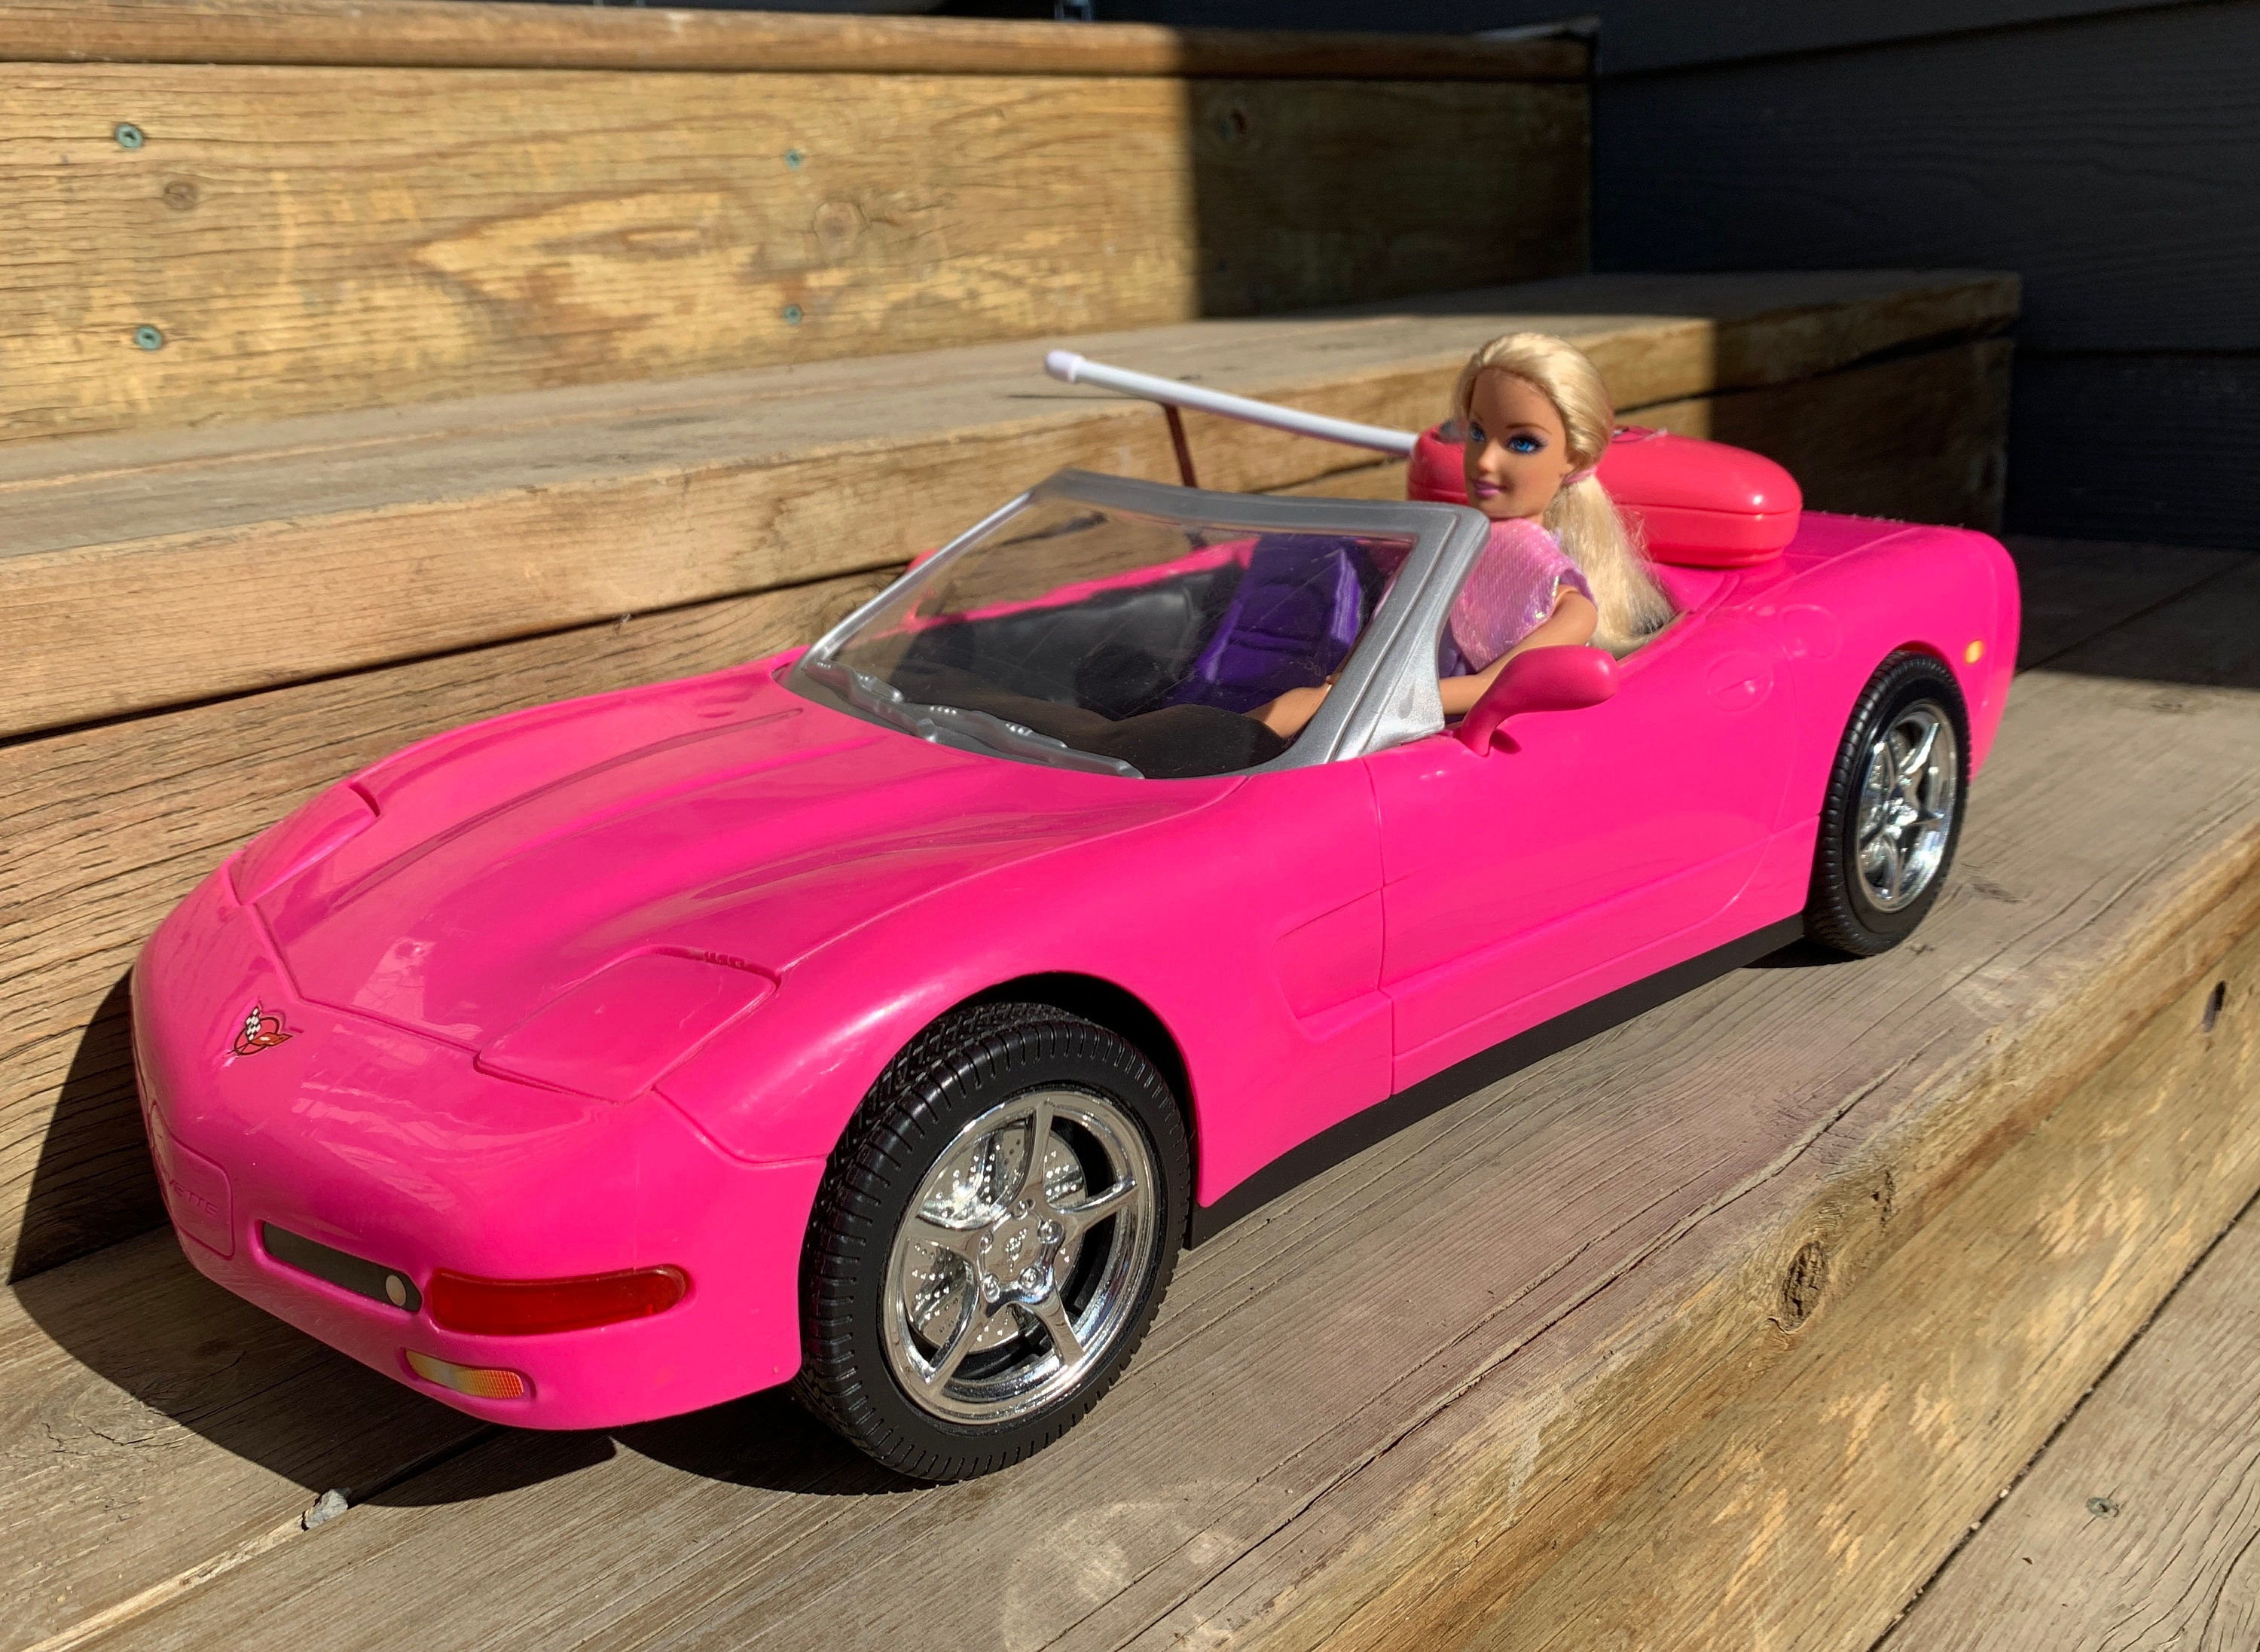 HOT WHEELS R/C BARBIE CORVETTE REMOTE CONTROL CAR FROM 'BARBIE: THE MOVIE'  - The Toy Book